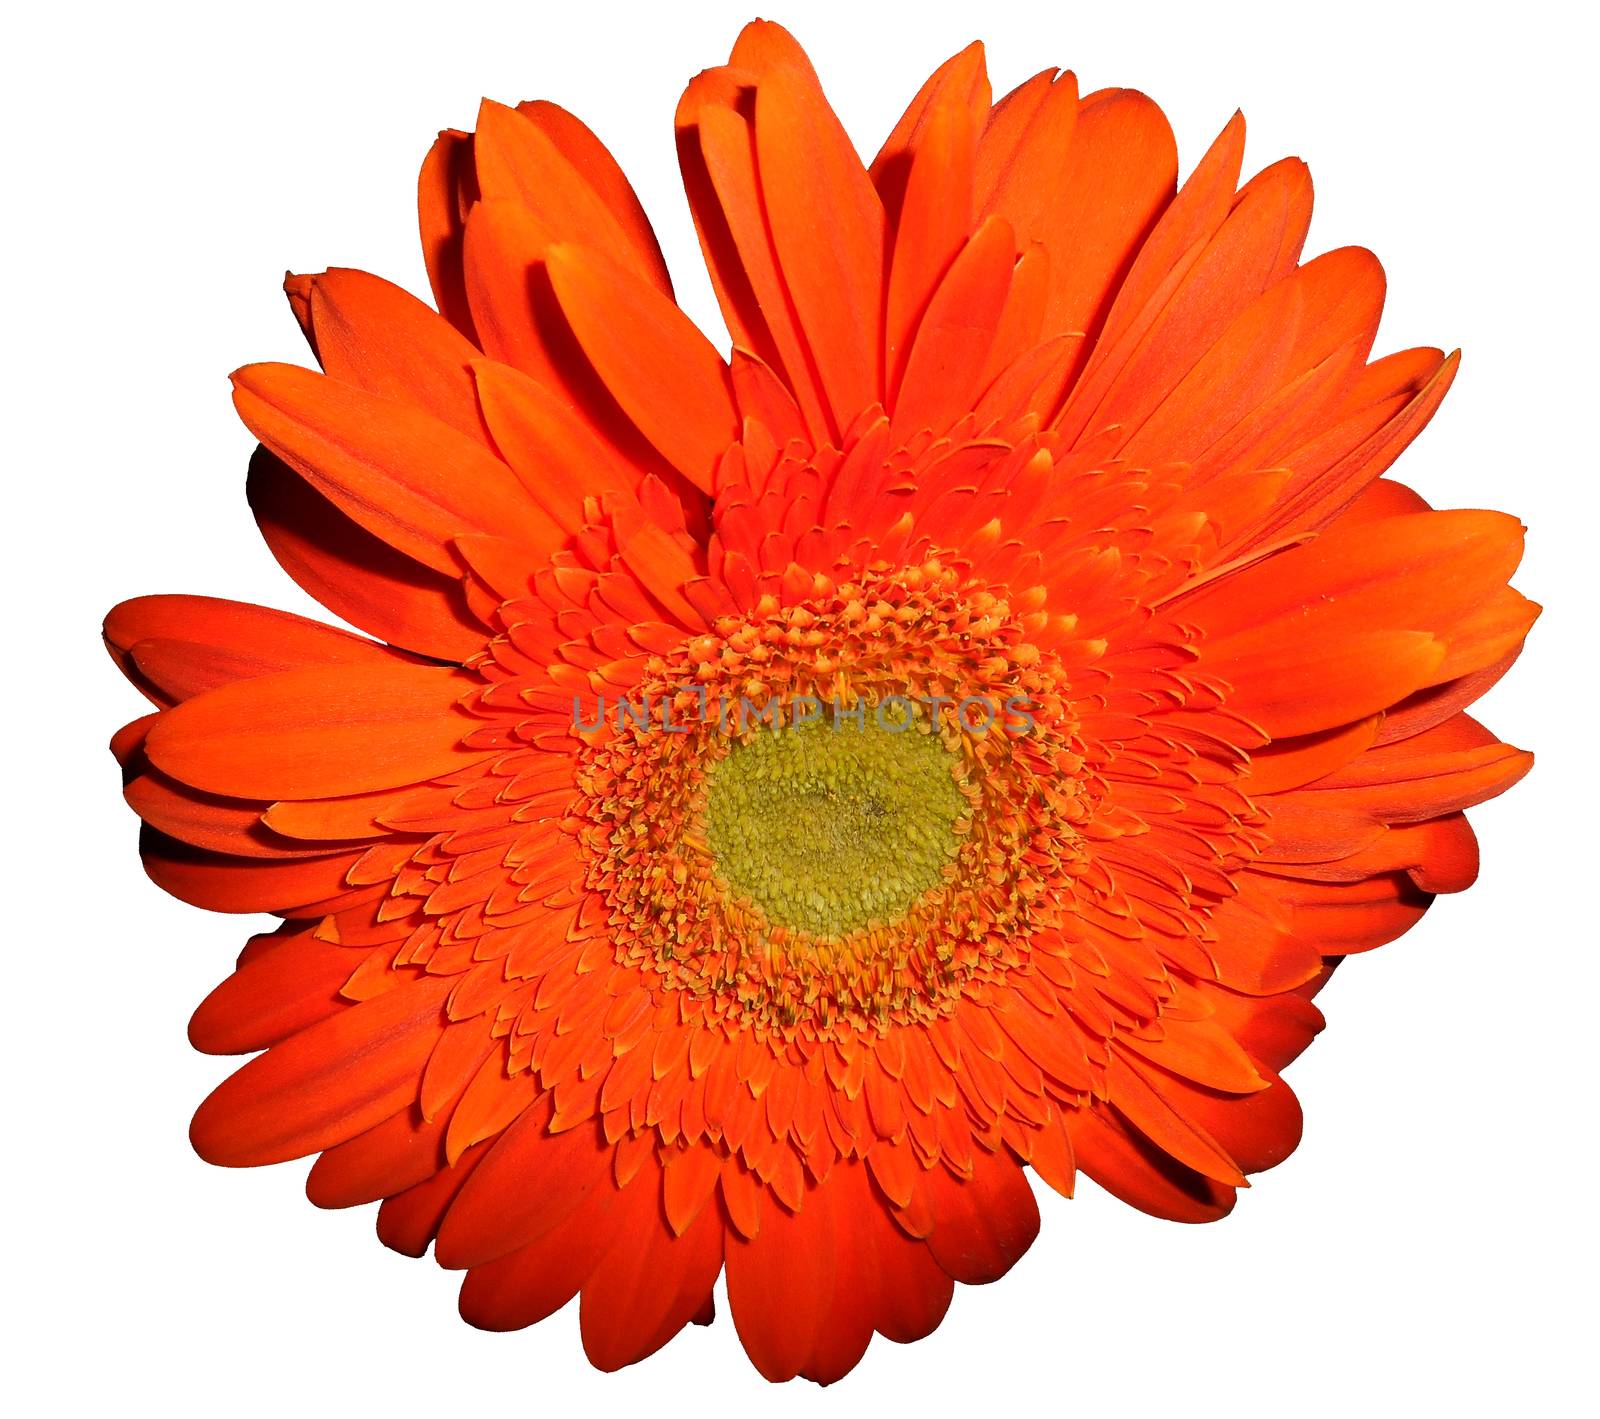 Isolated close up view of a orange daisy.

Picture taken on October 20, 2014.